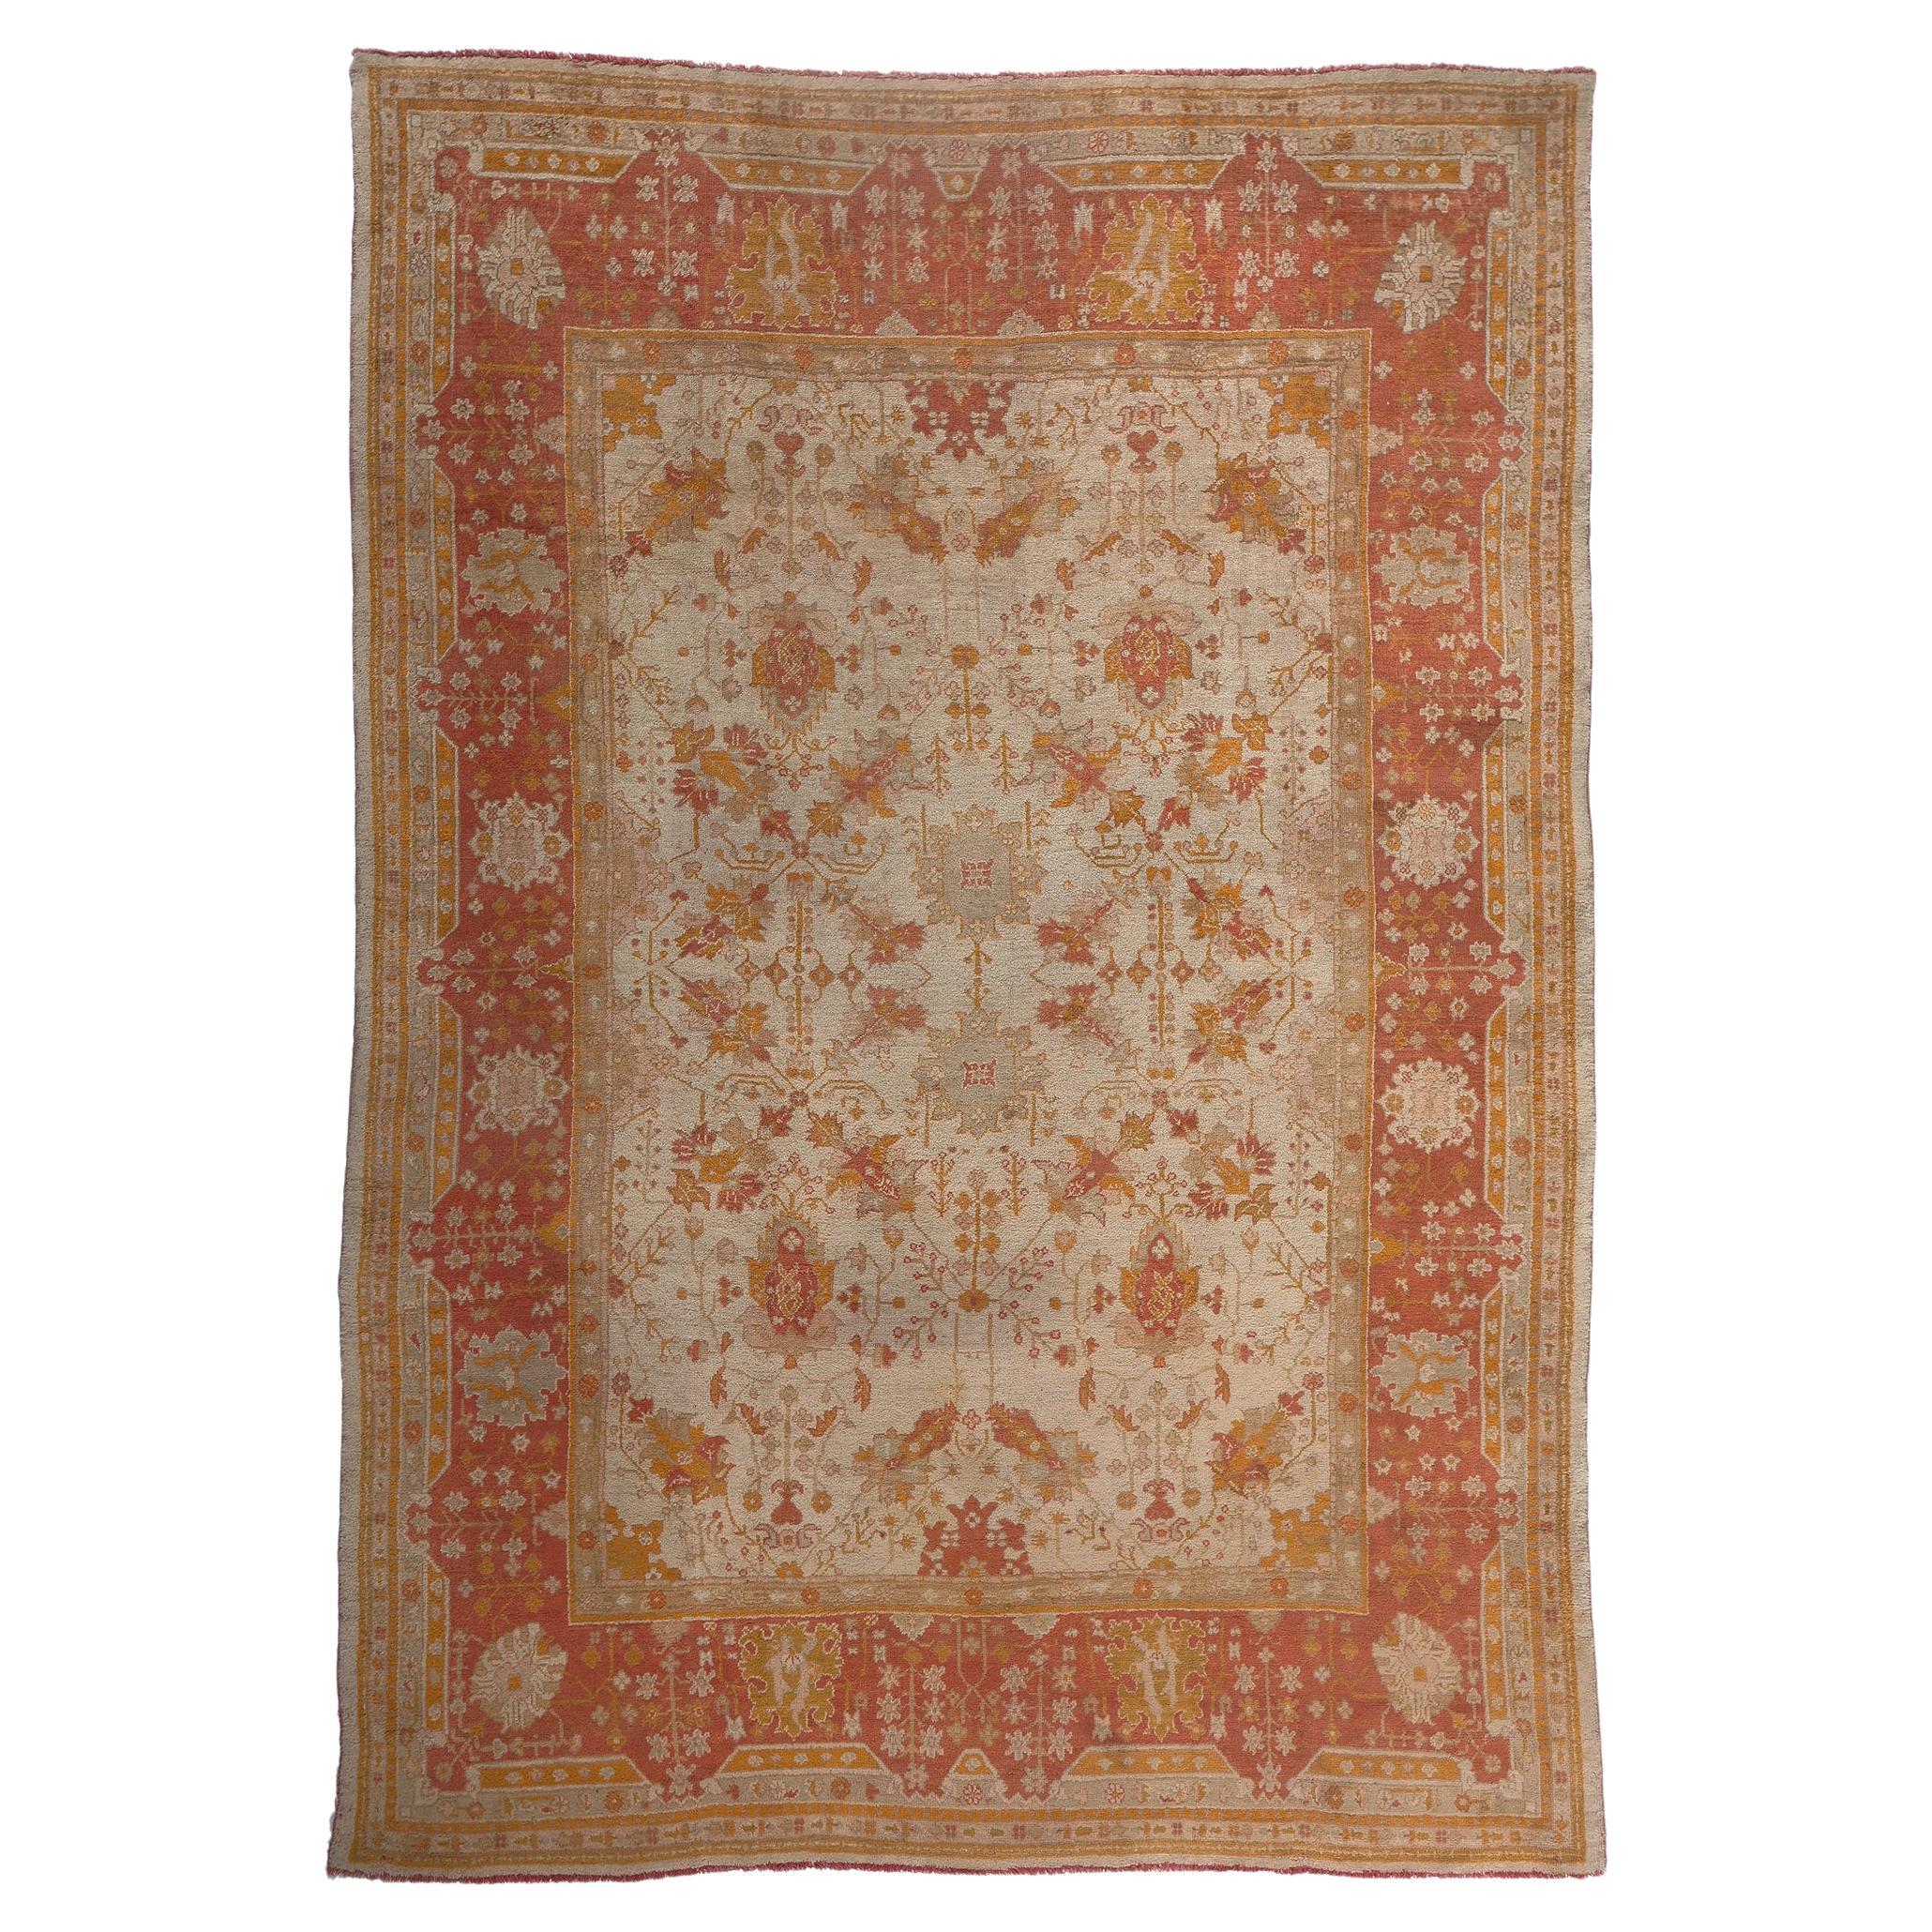 Antique Turkish Oushak Rug, Relaxed Familiarity Meets Understated Elegance